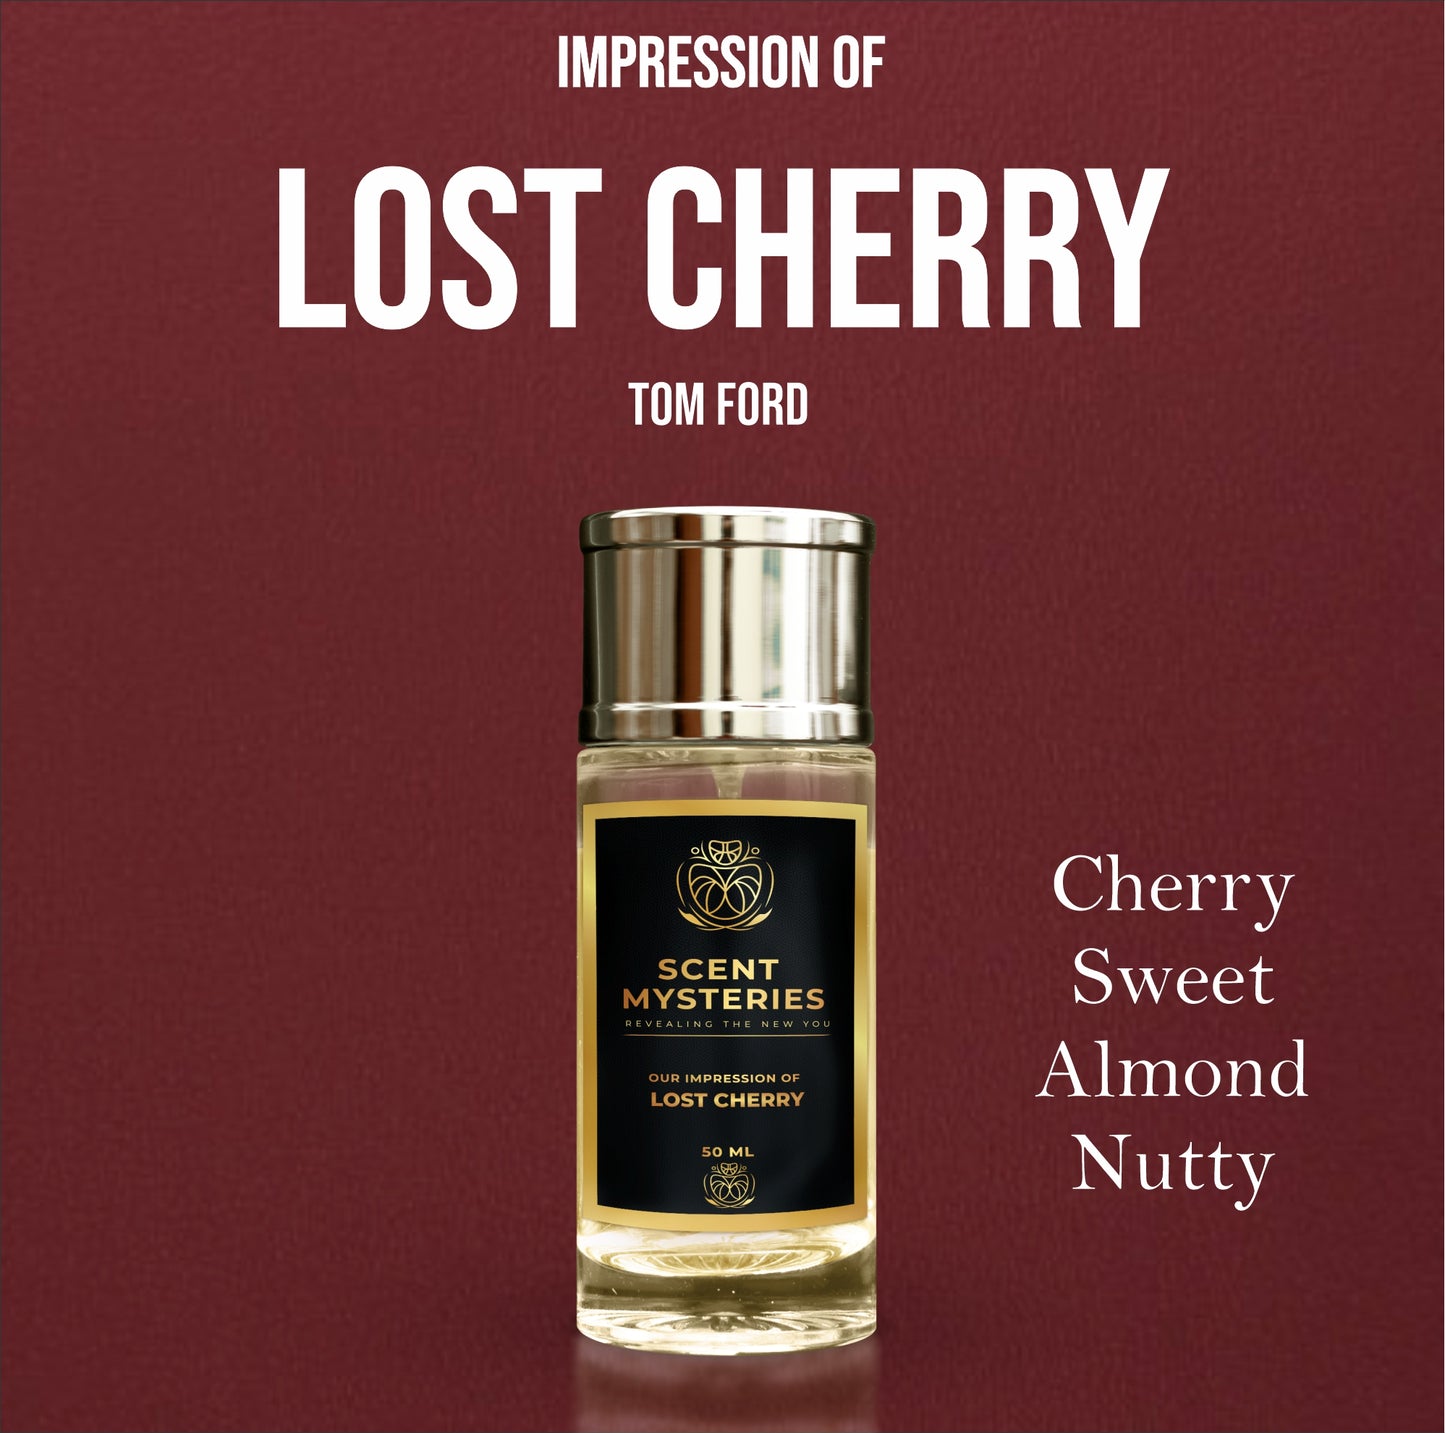 Our Impression of Lost Cherry